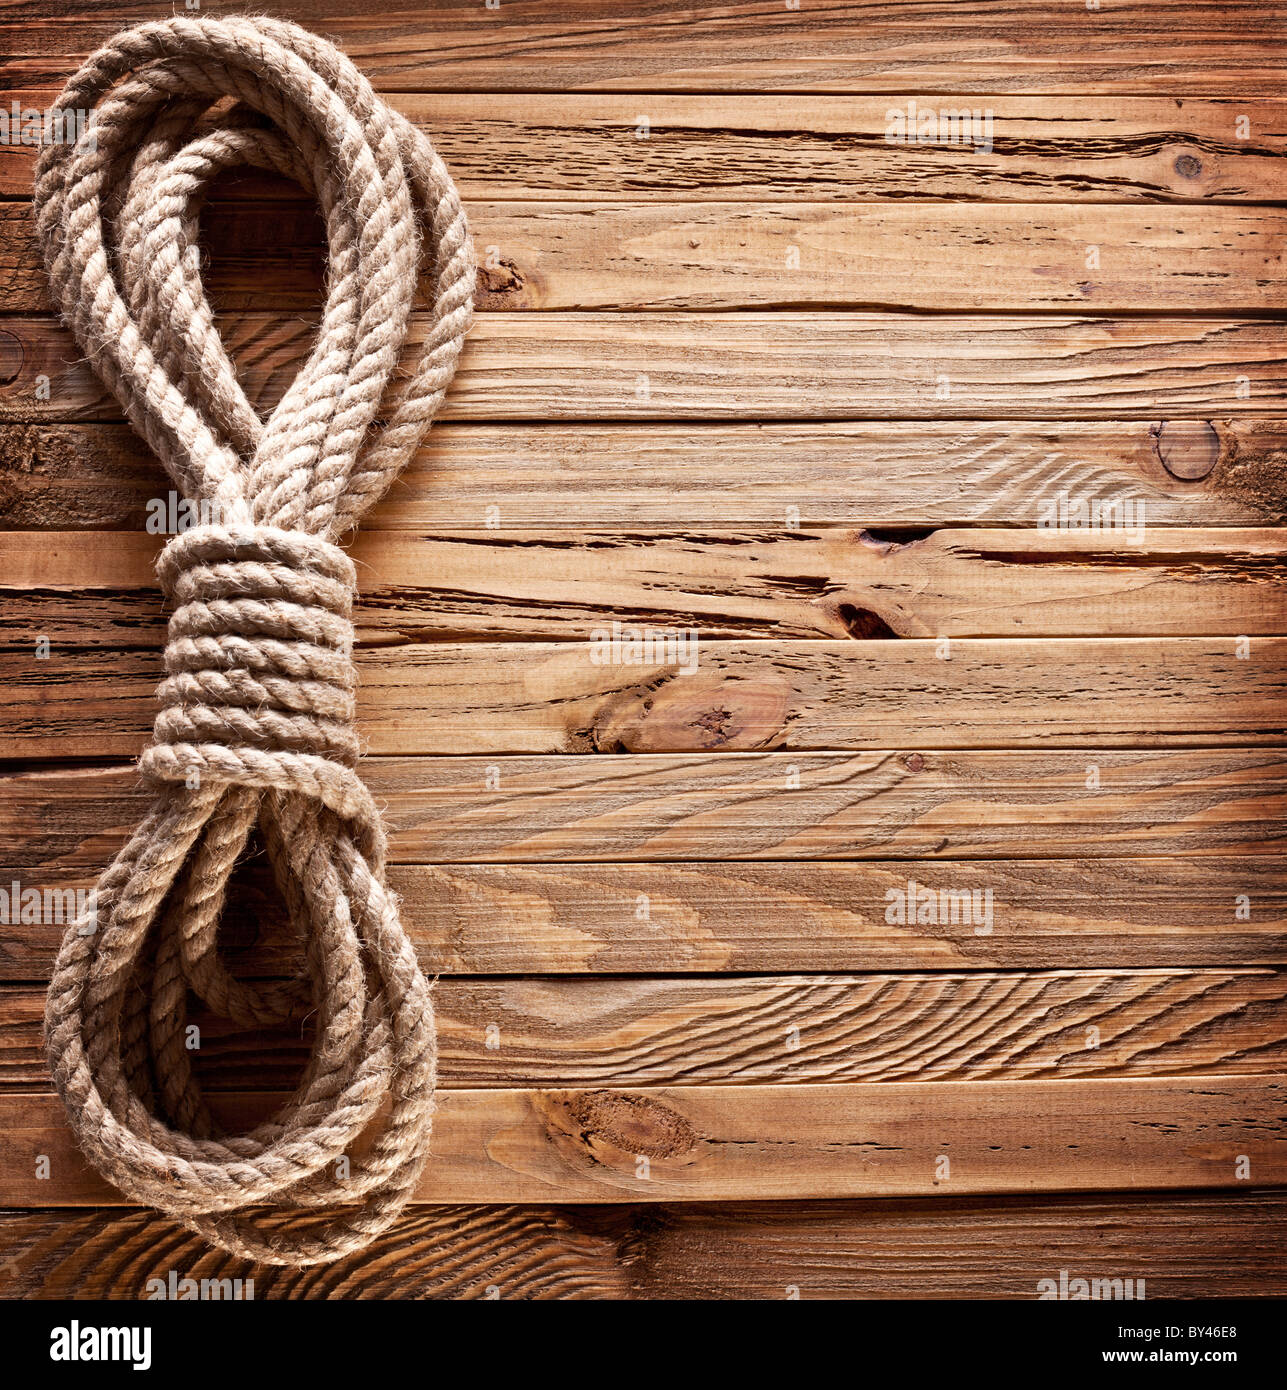 Image of old texture of wooden boards with ship rope. Stock Photo